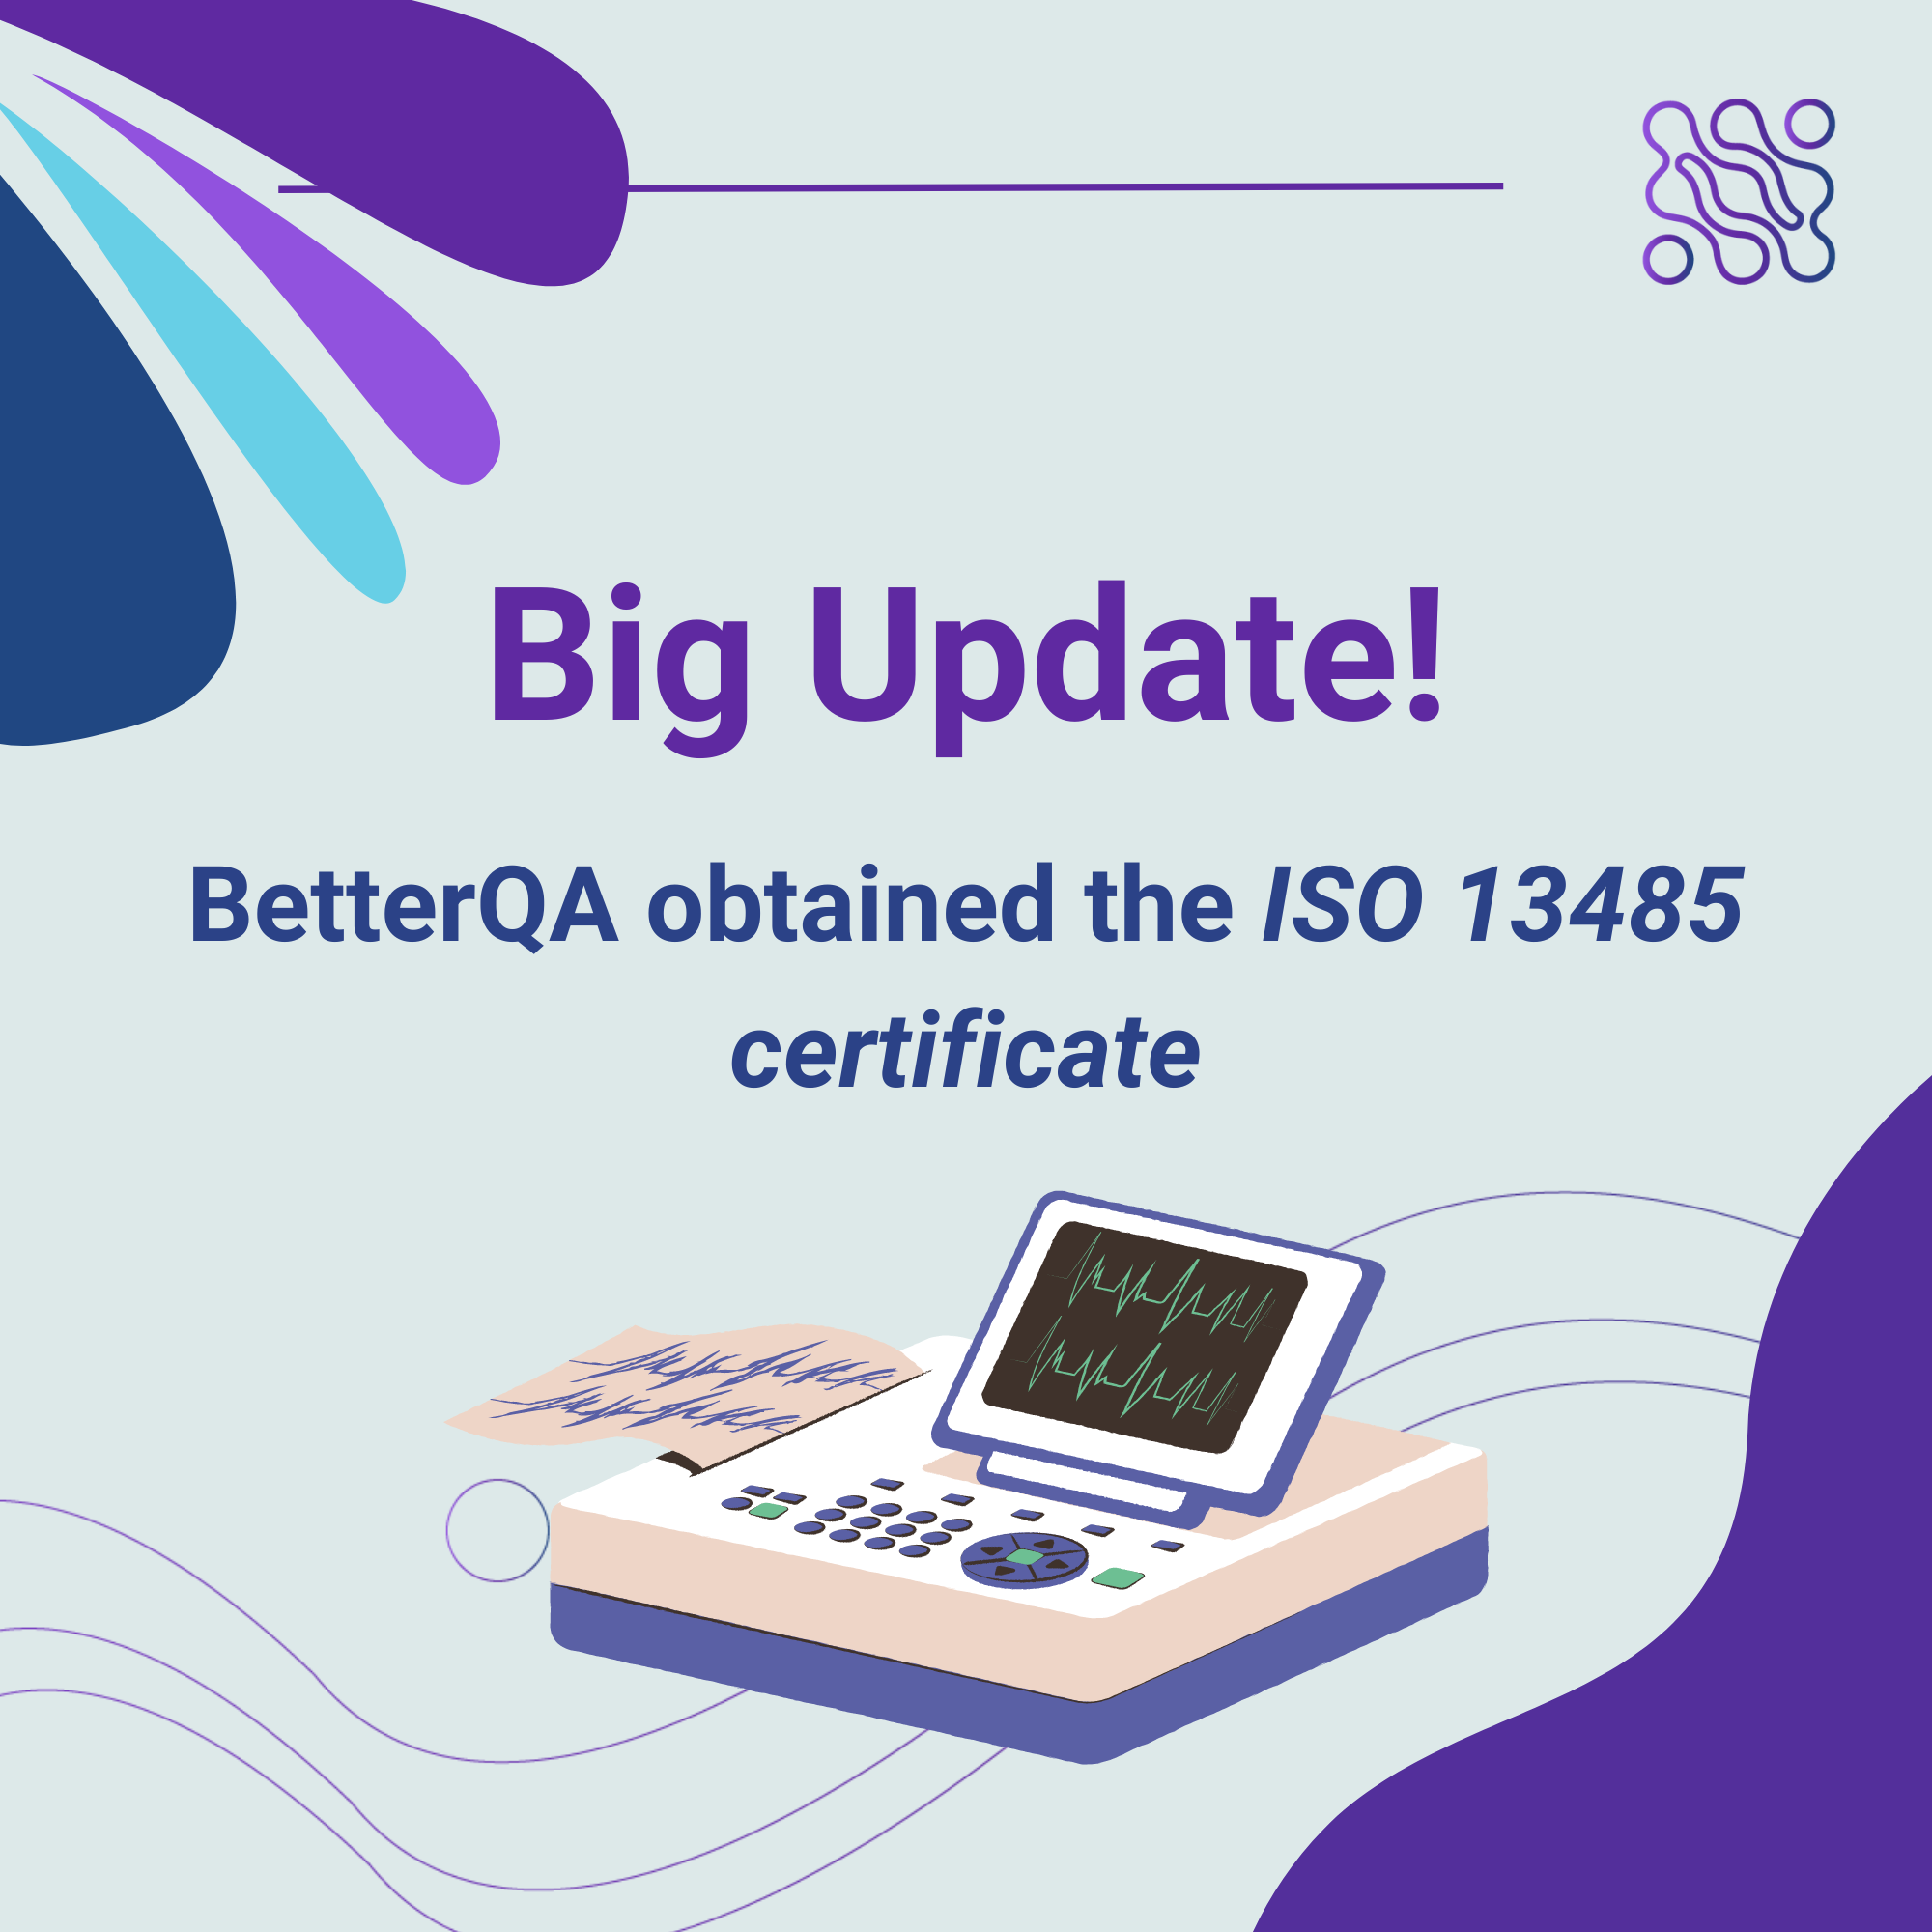 Big Update! BetterQA obtained the ISO 13485 certificate